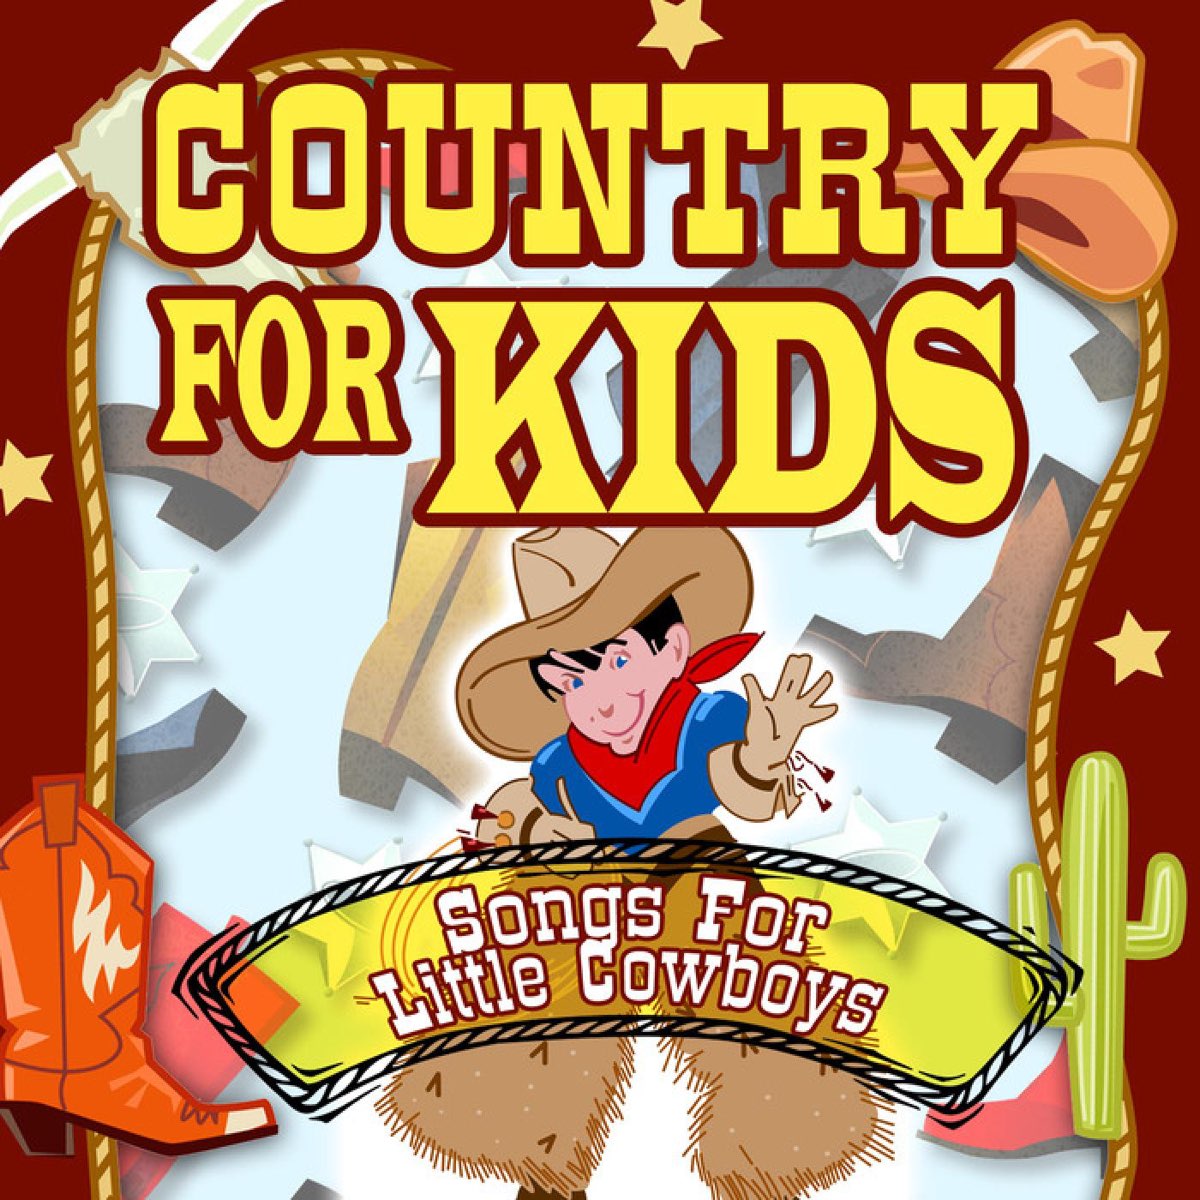 Cowboy Song for Kids. Countries Songs for Kids. Countries for Kids.